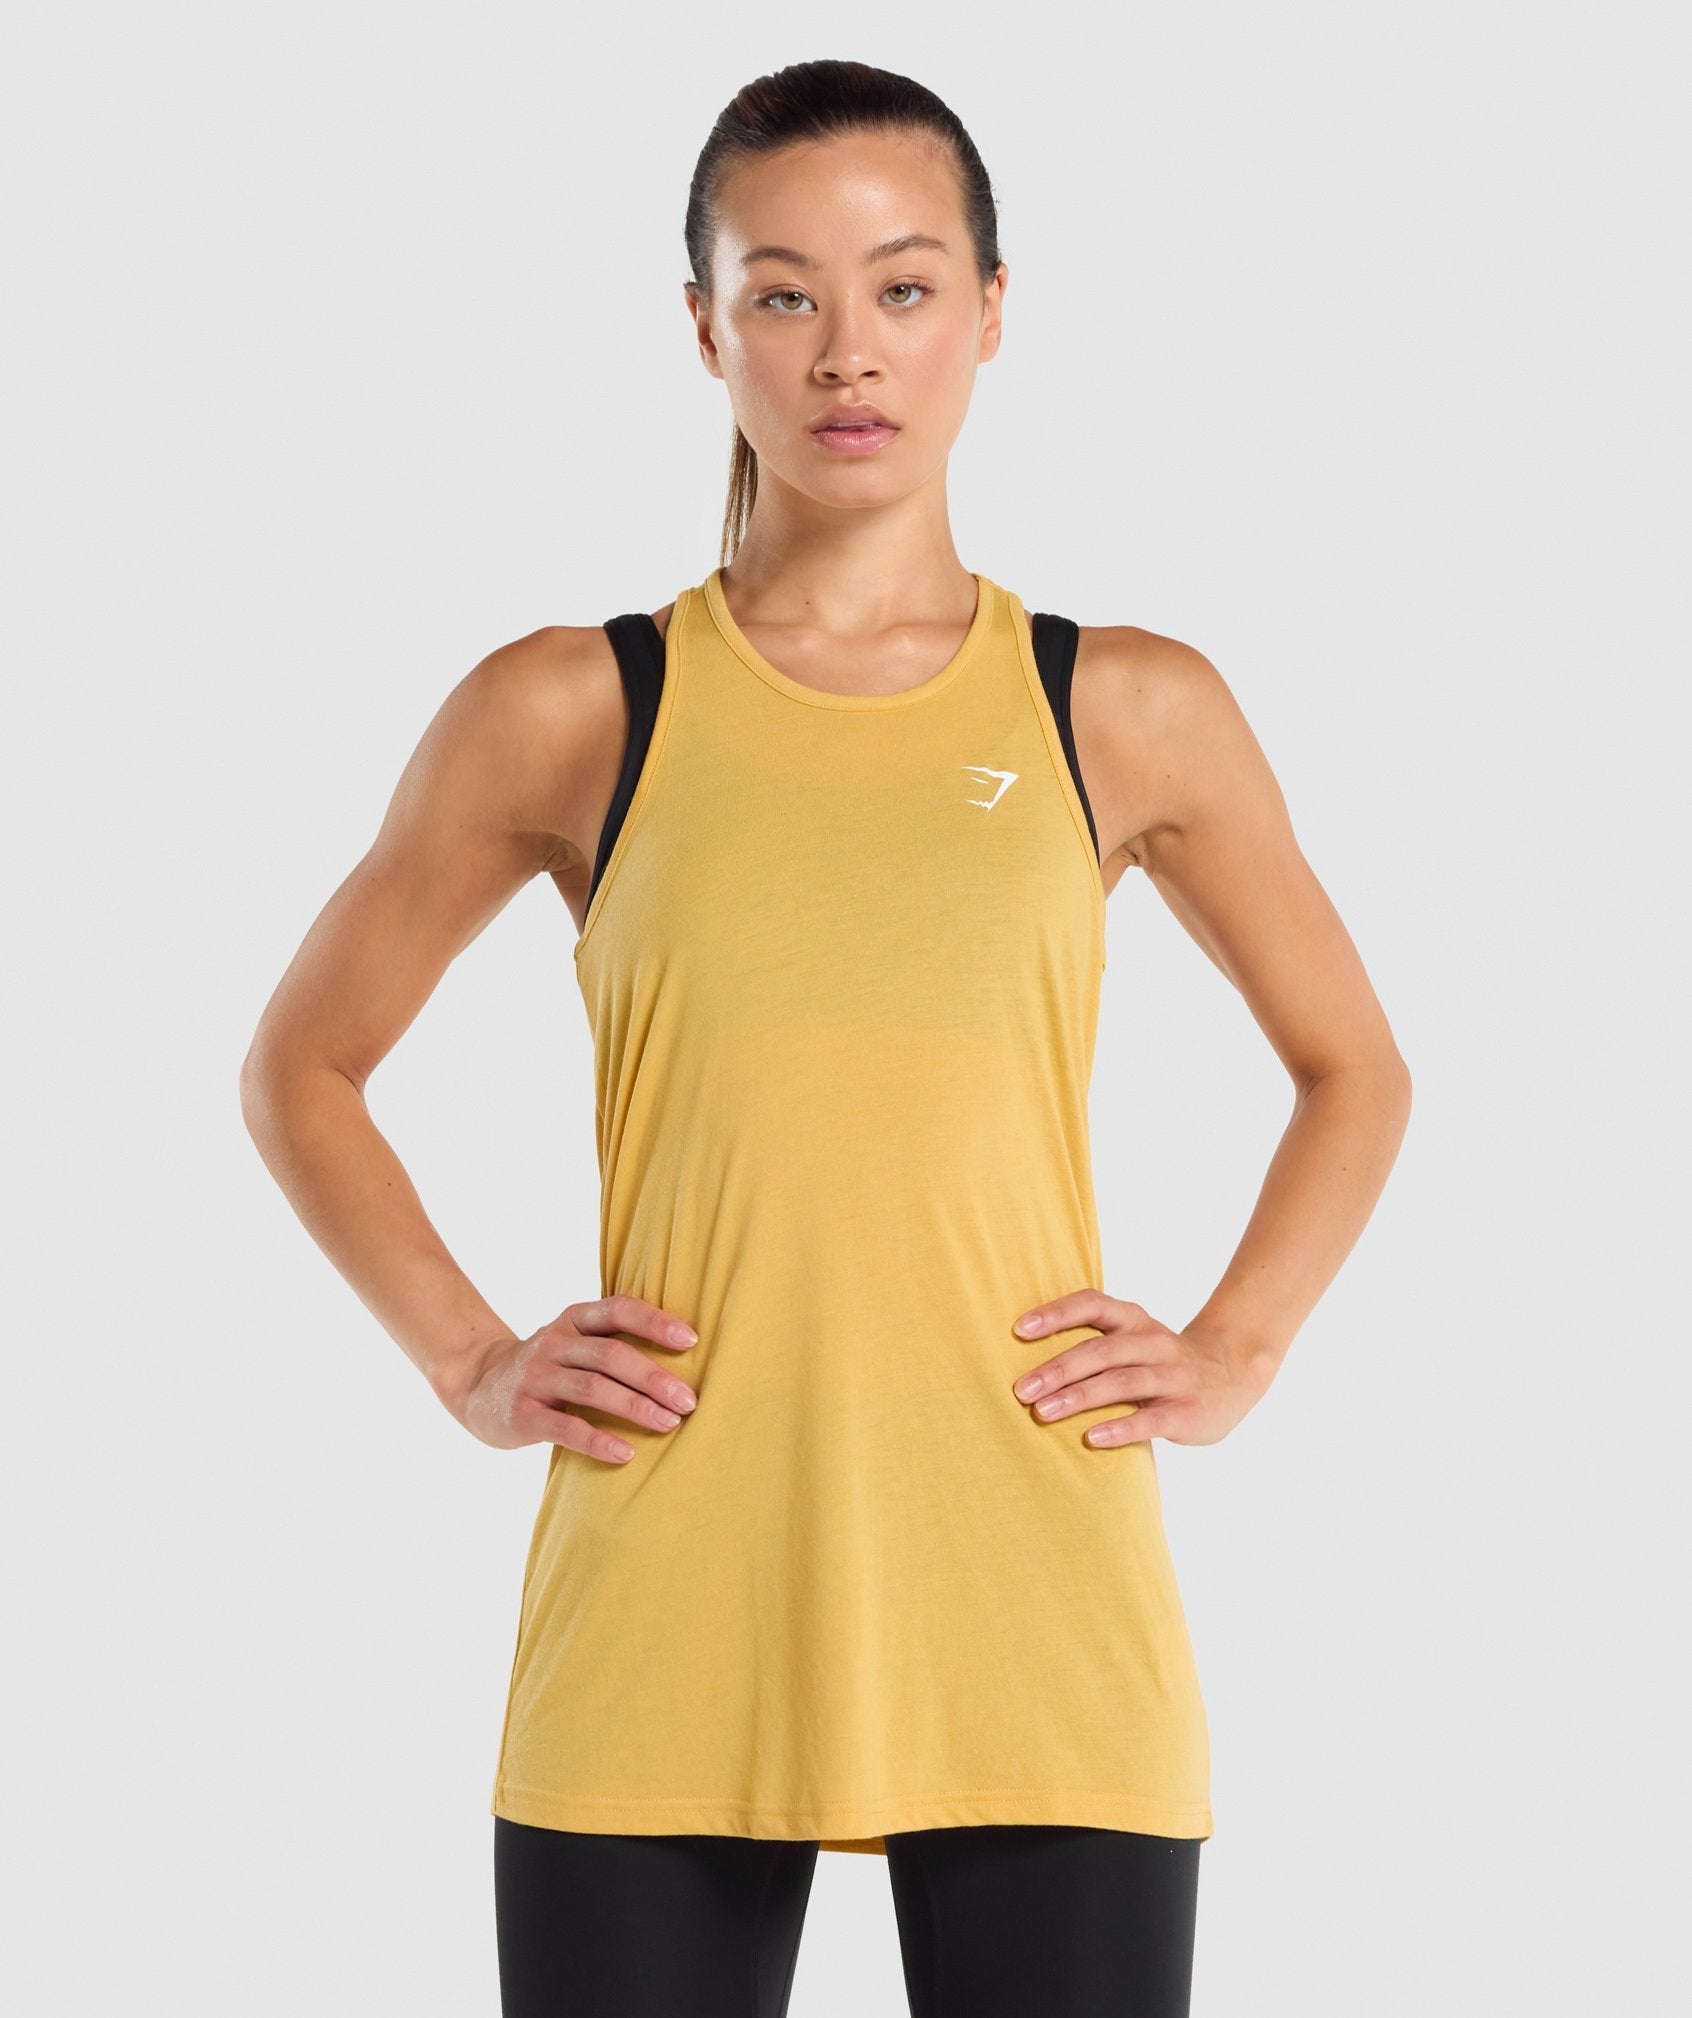 Training Oversized Vest in Yellow - view 1